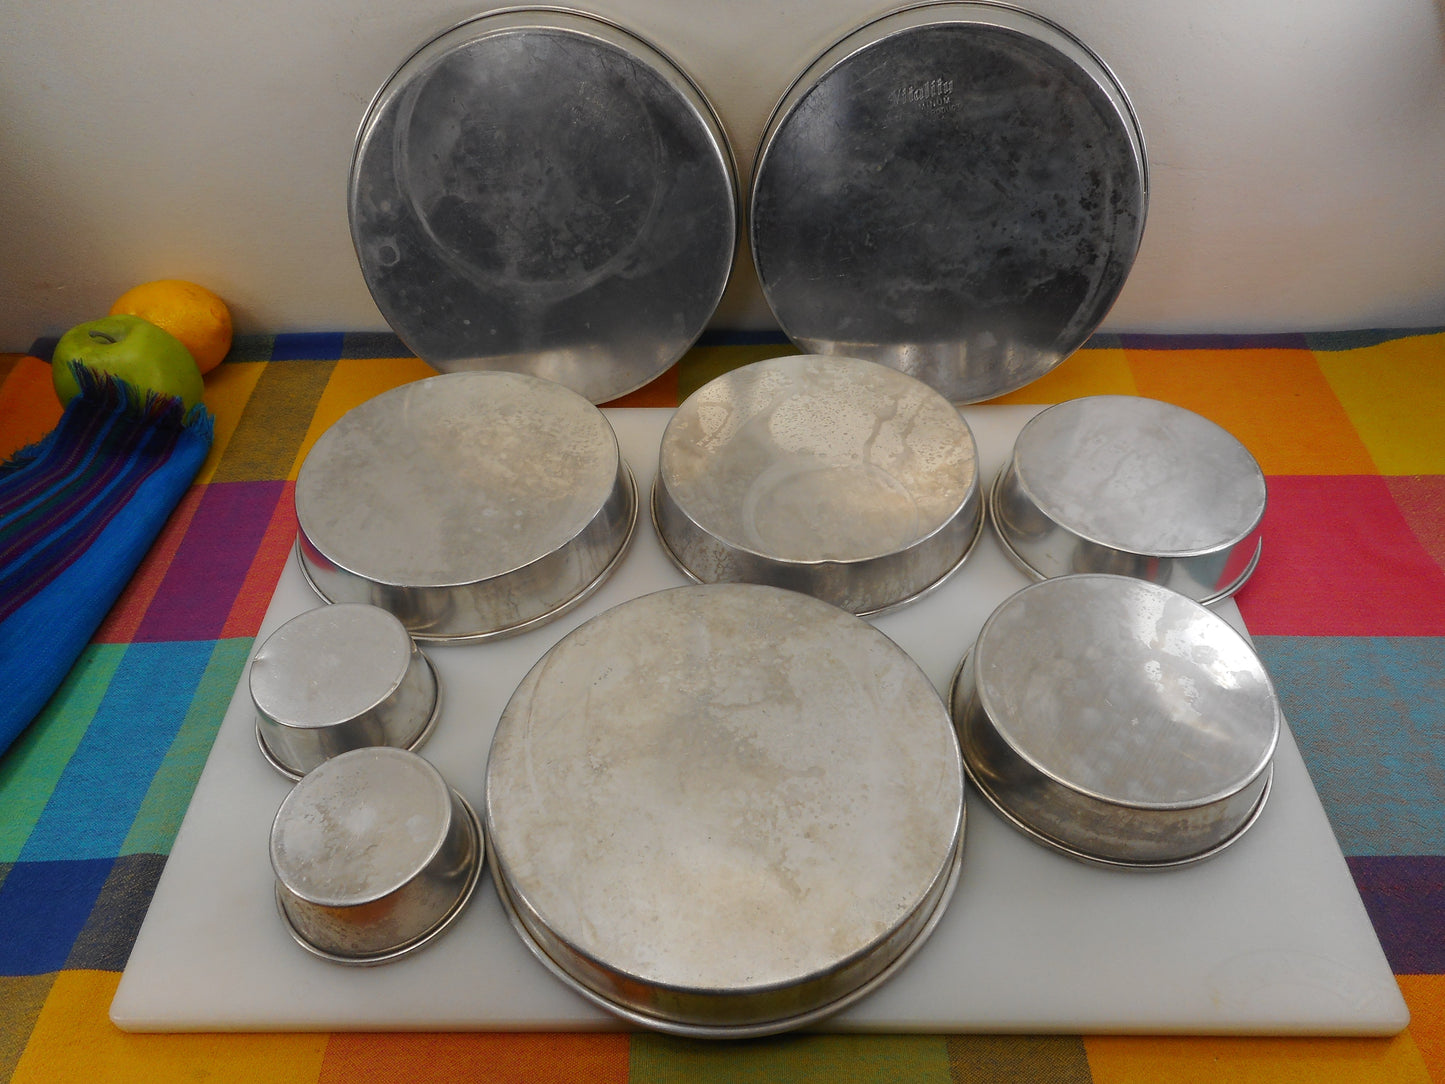 Round Aluminum Cake Pan 9 Lot - Mirro Vitality Wear Ever Unbranded 3" 5.5" 7.5" 8" 9" USA